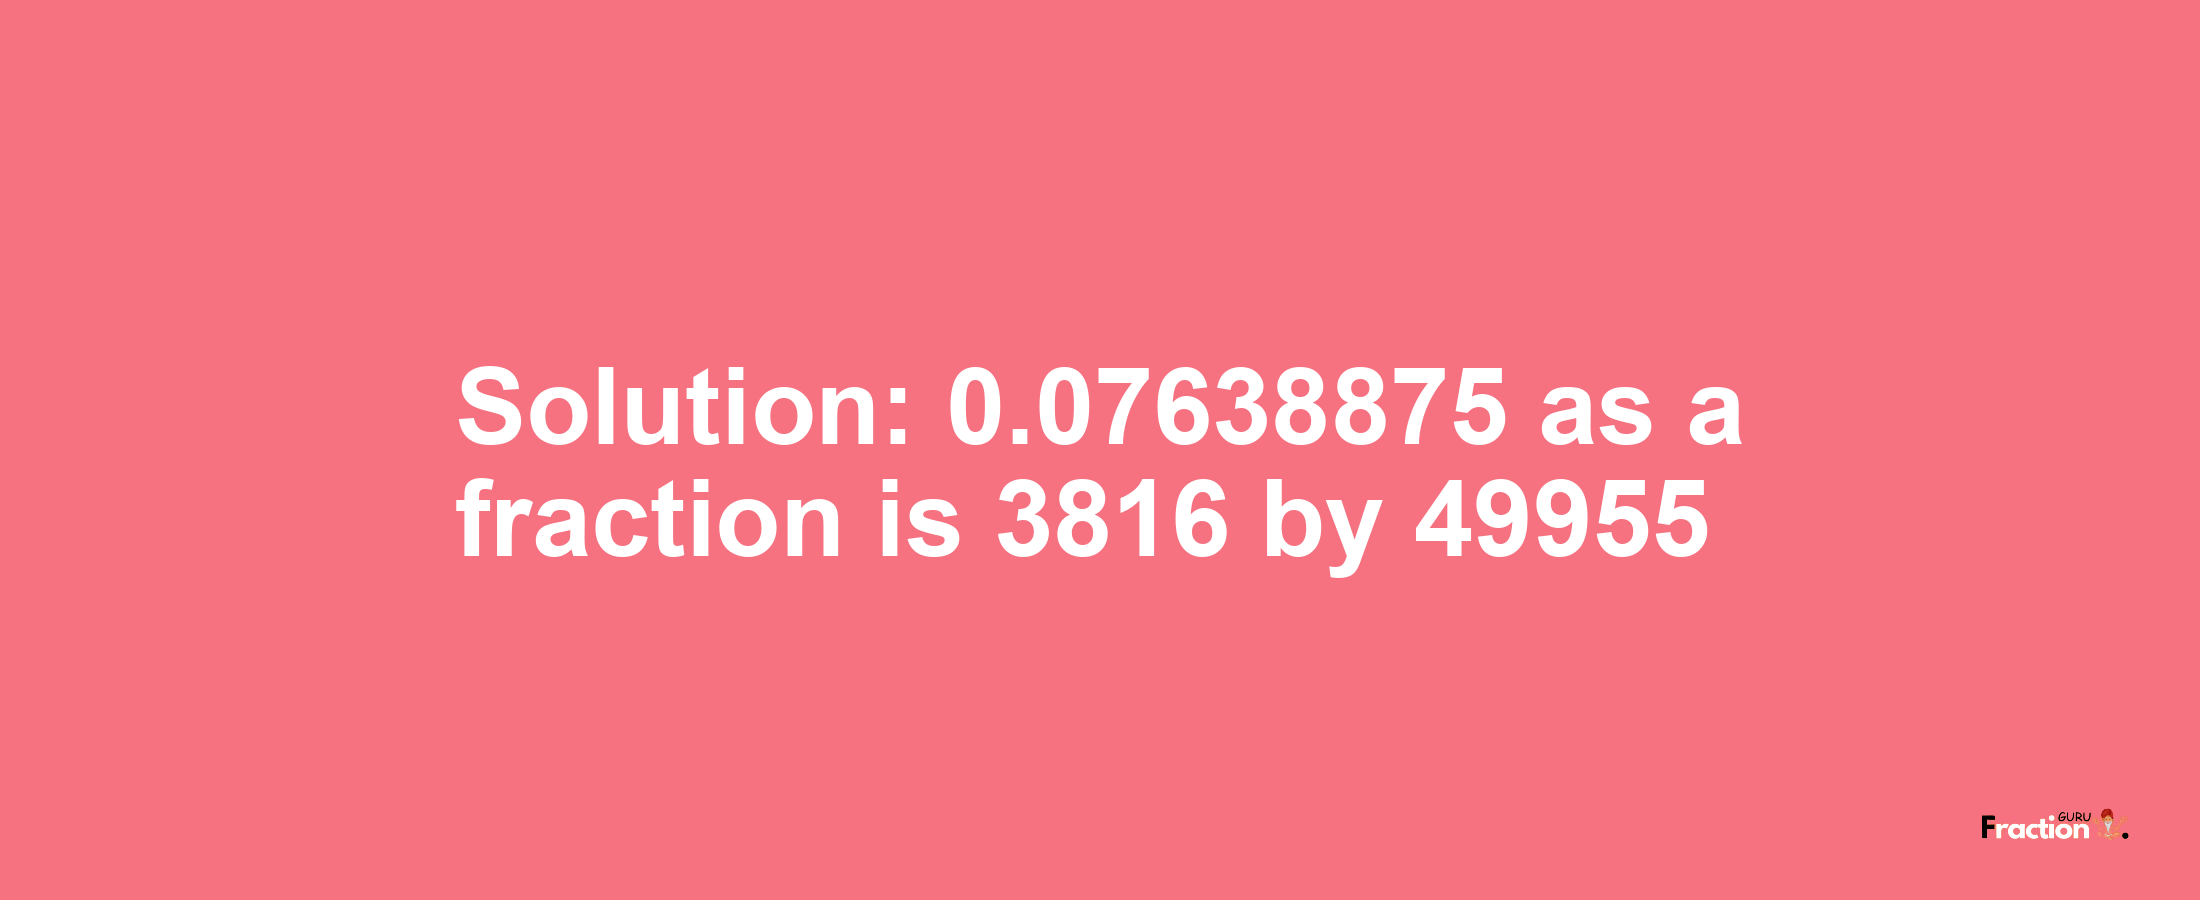 Solution:0.07638875 as a fraction is 3816/49955